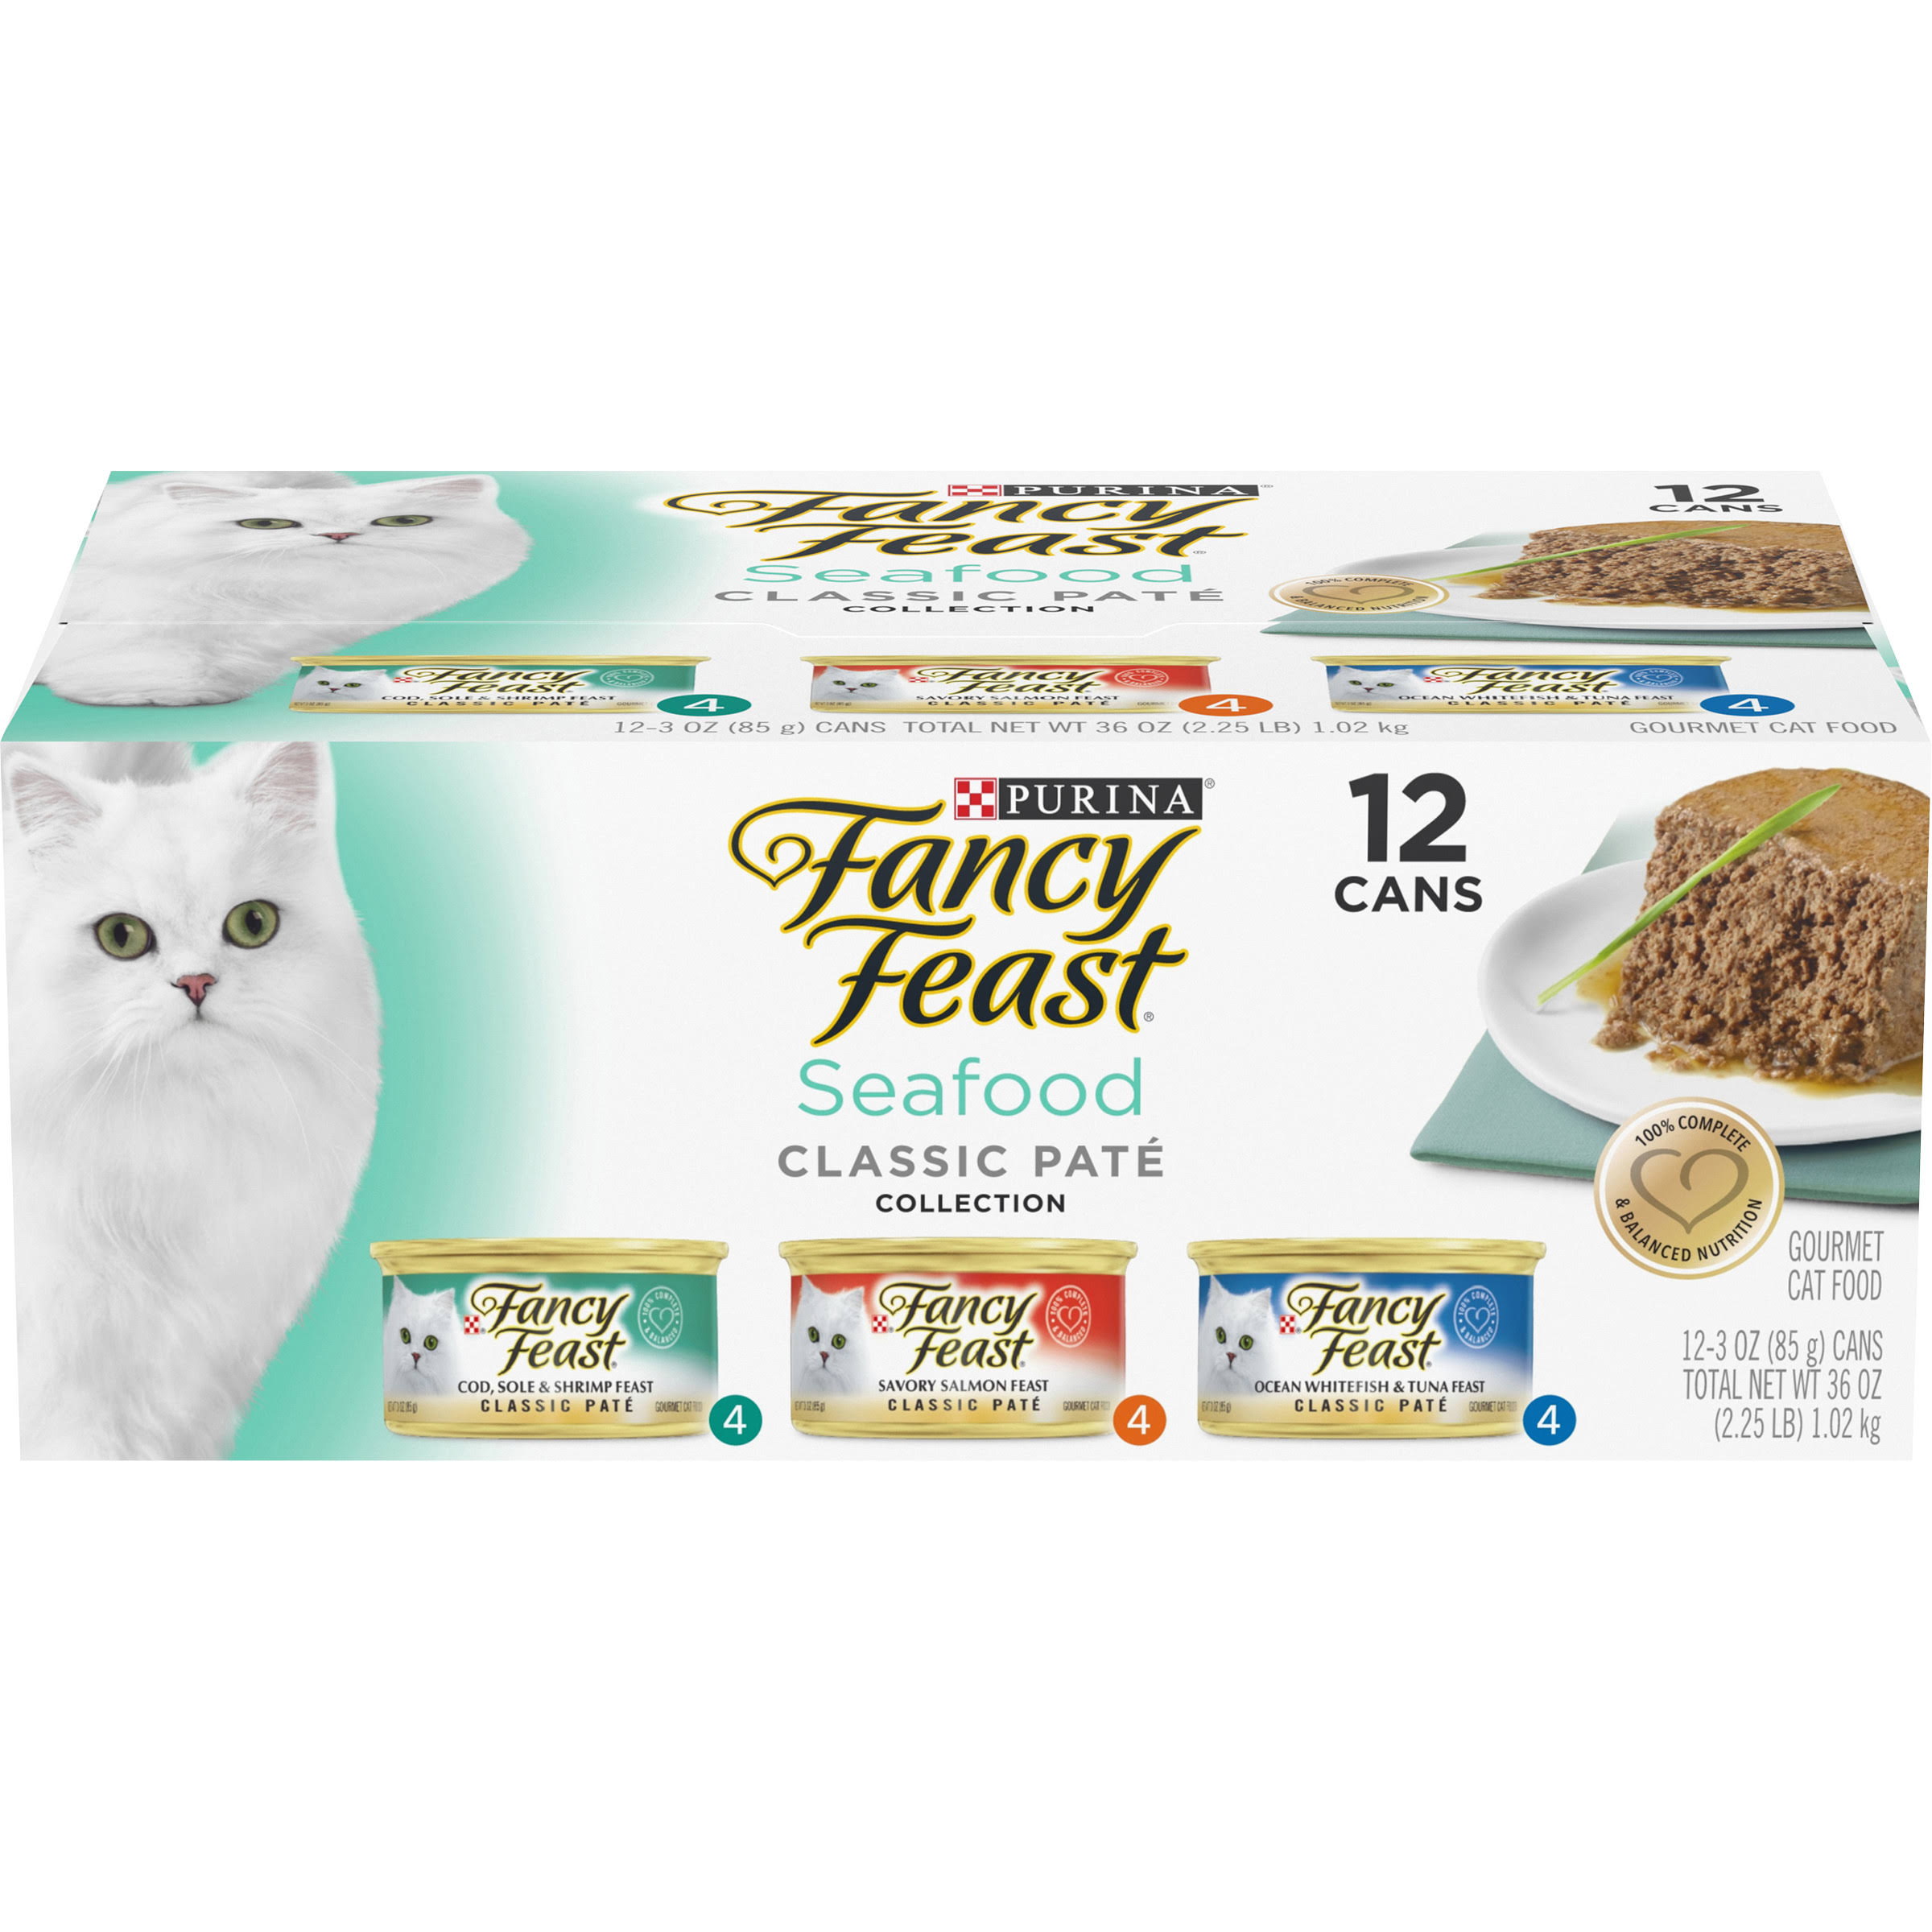 Purina Fancy Feast Classic Seafood Variety Cat Food - 3oz, 12 Cans